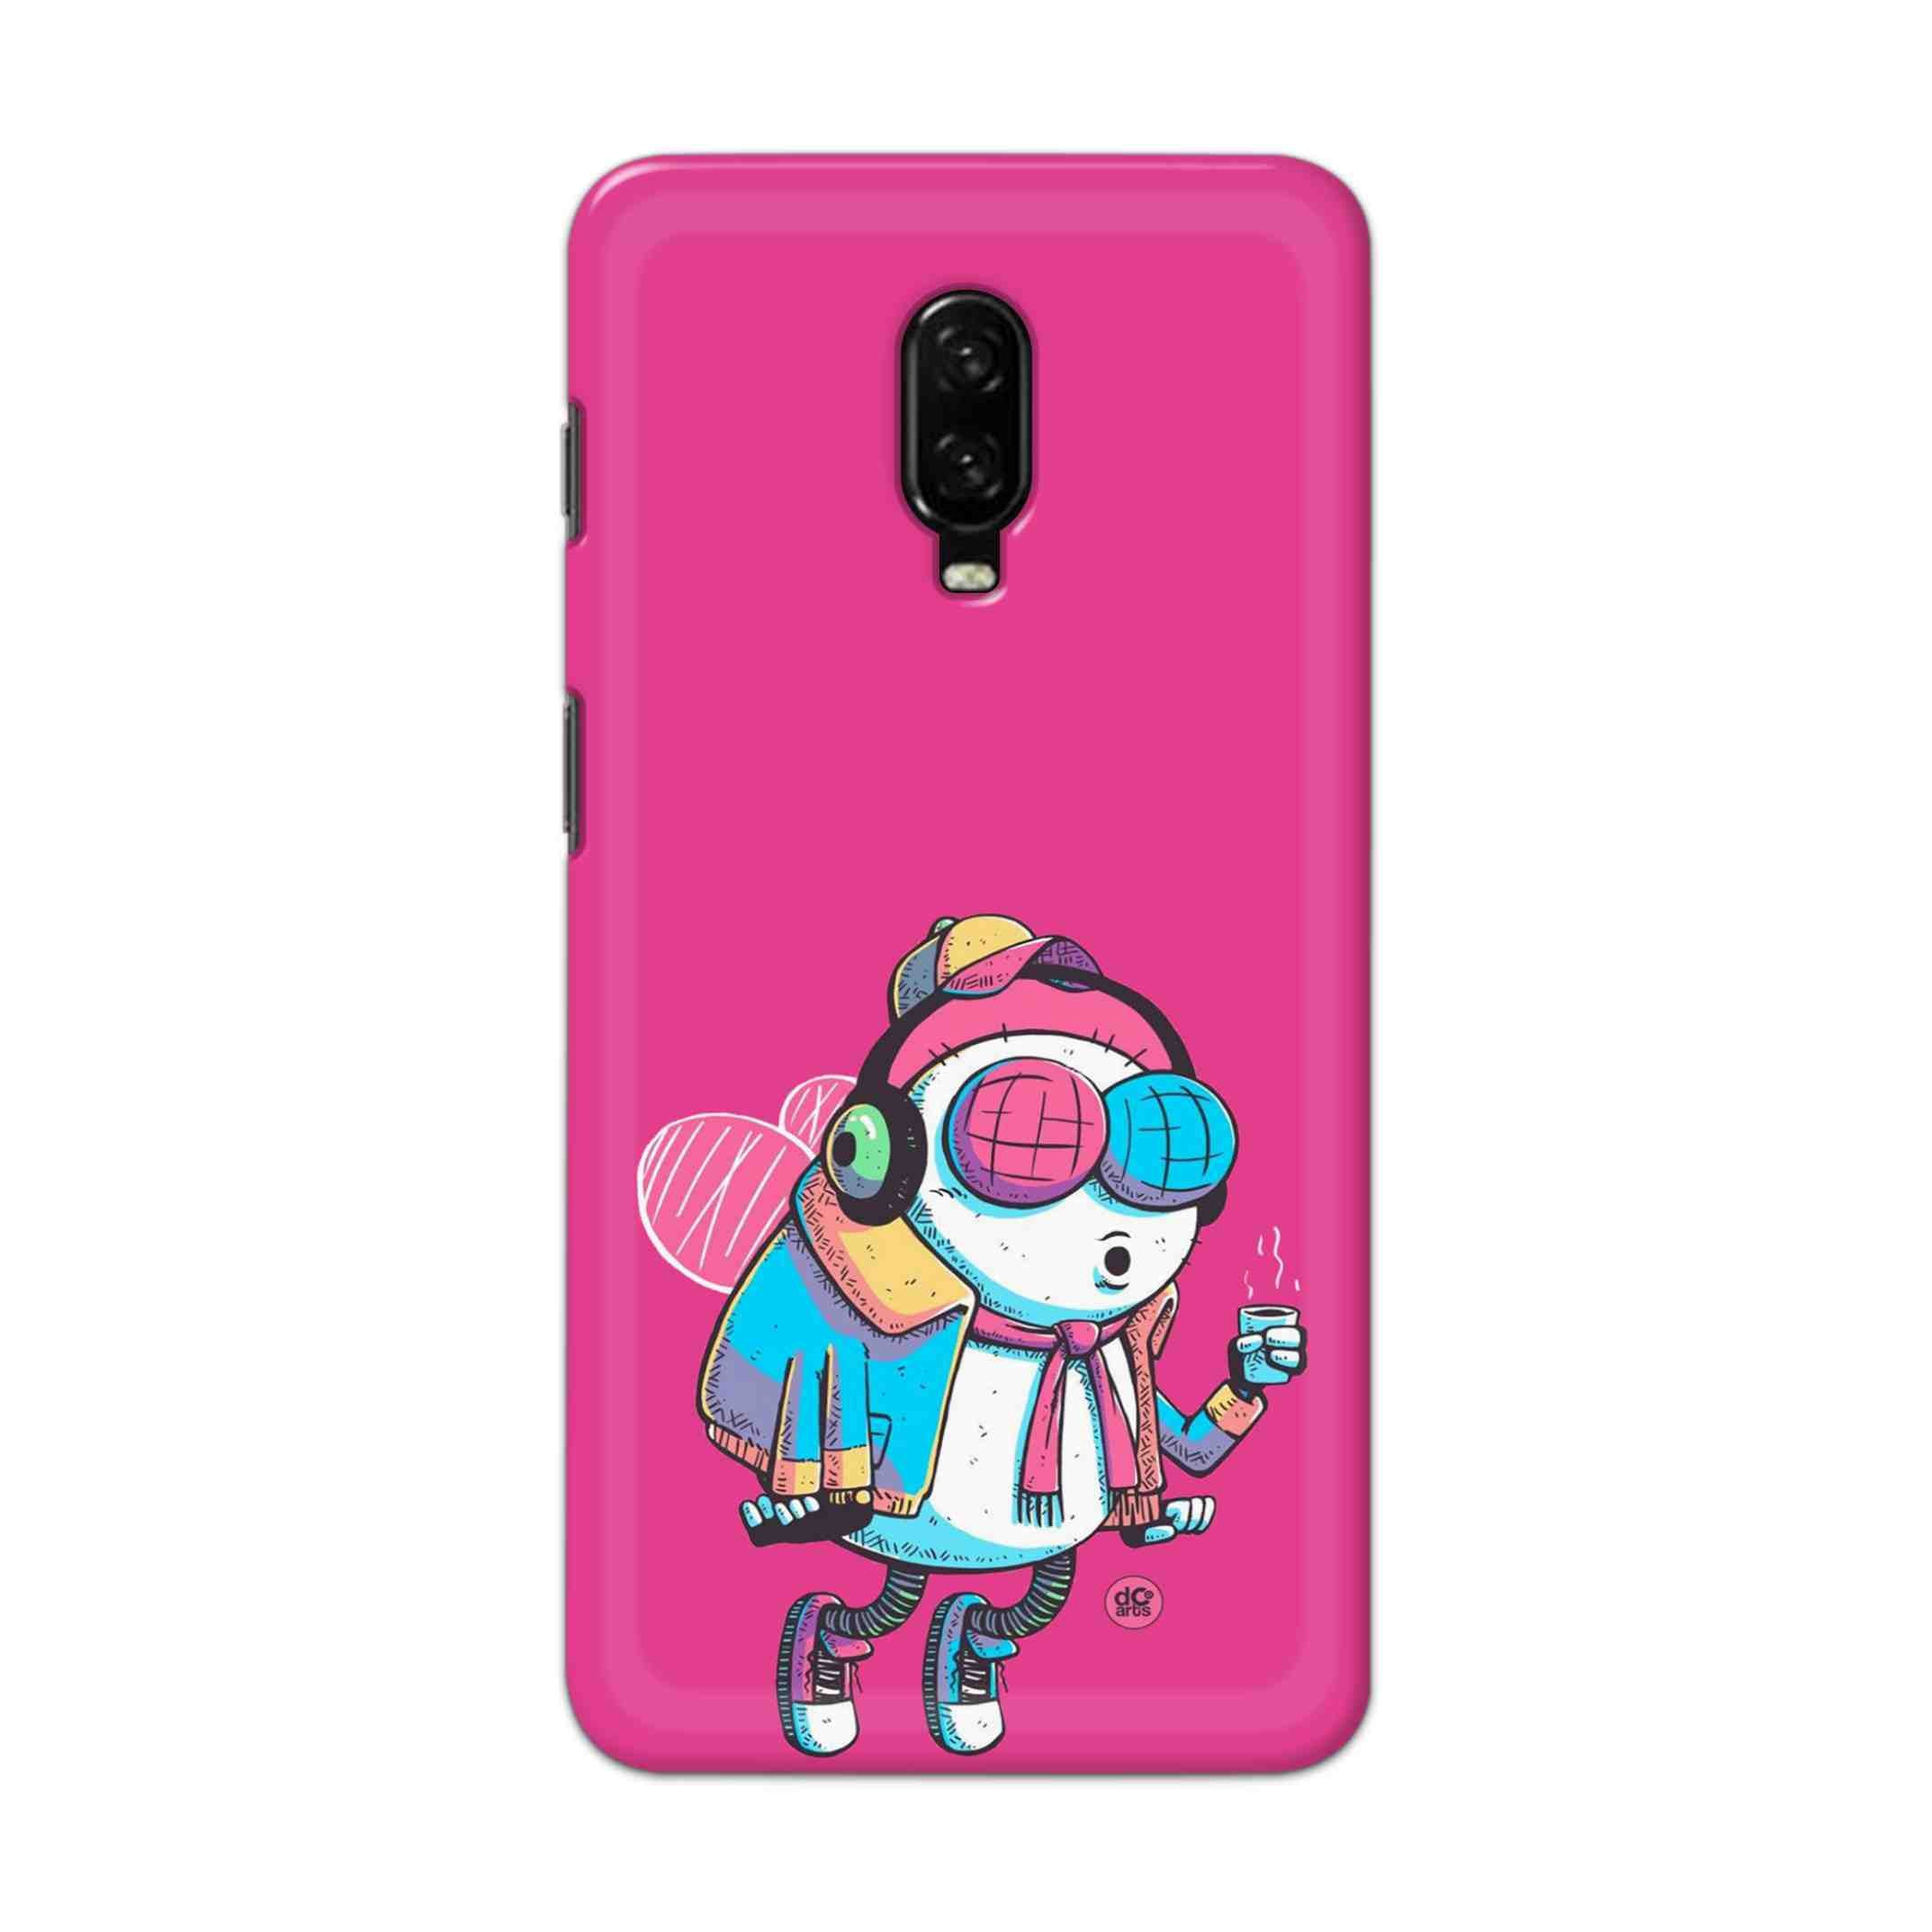 Buy Sky Fly Hard Back Mobile Phone Case Cover For OnePlus 6T Online